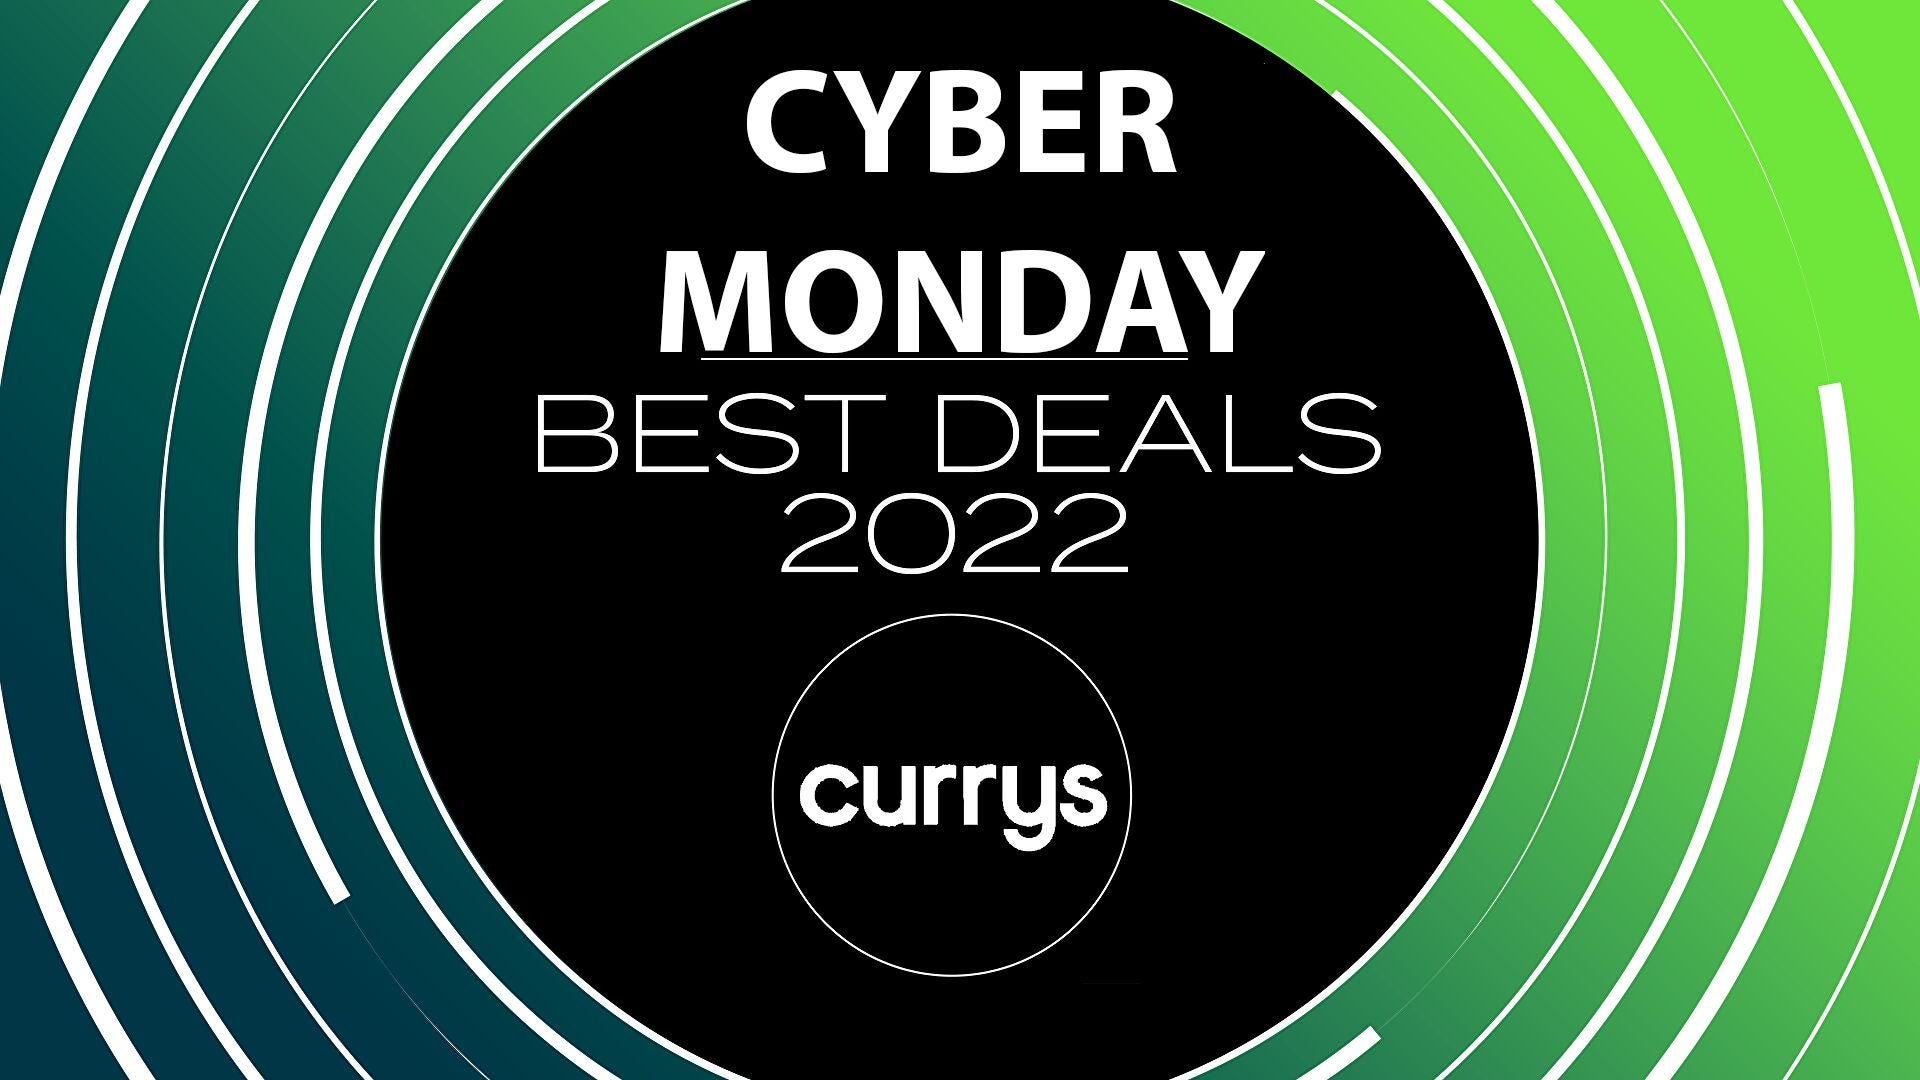 Image for Cyber Monday Currys deals 2022: best offers and discounts